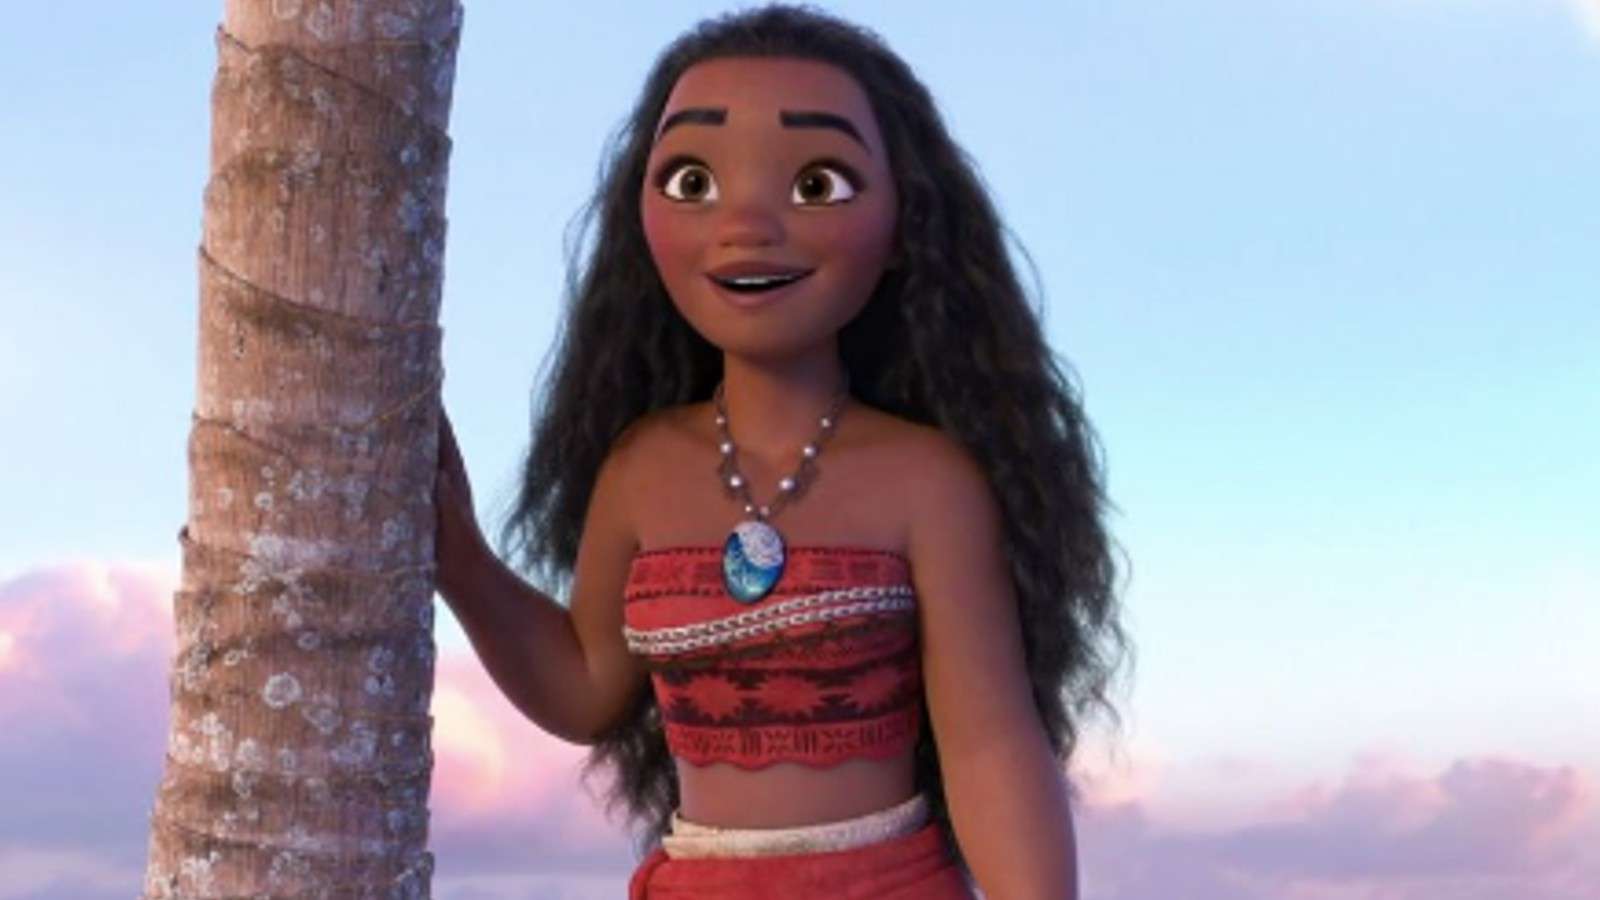 Live-action Moana movie: Release date, cast & more - Dexerto